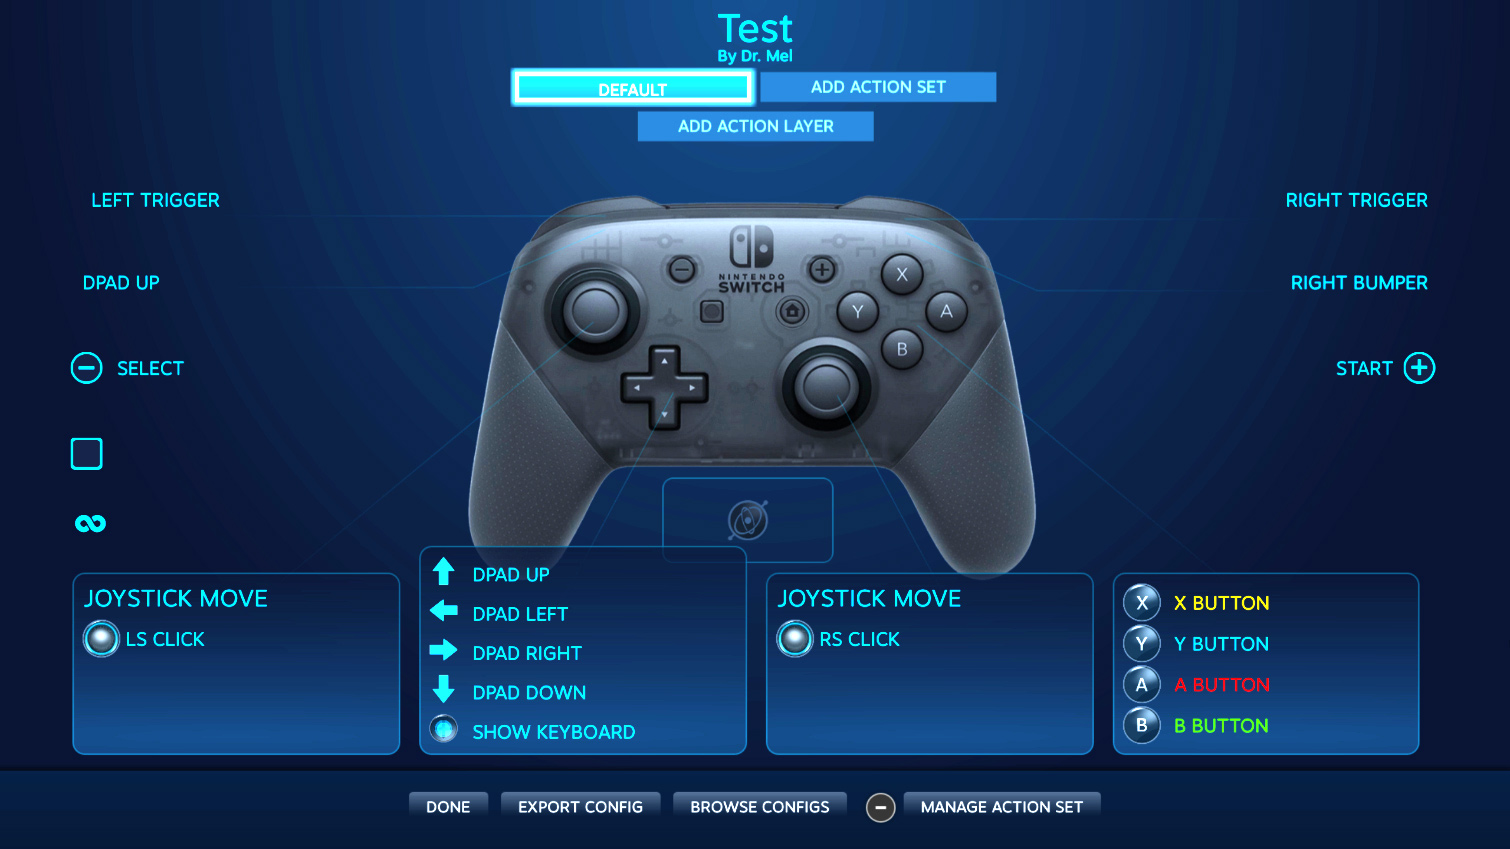 use ps4 controller for hollow knight mac